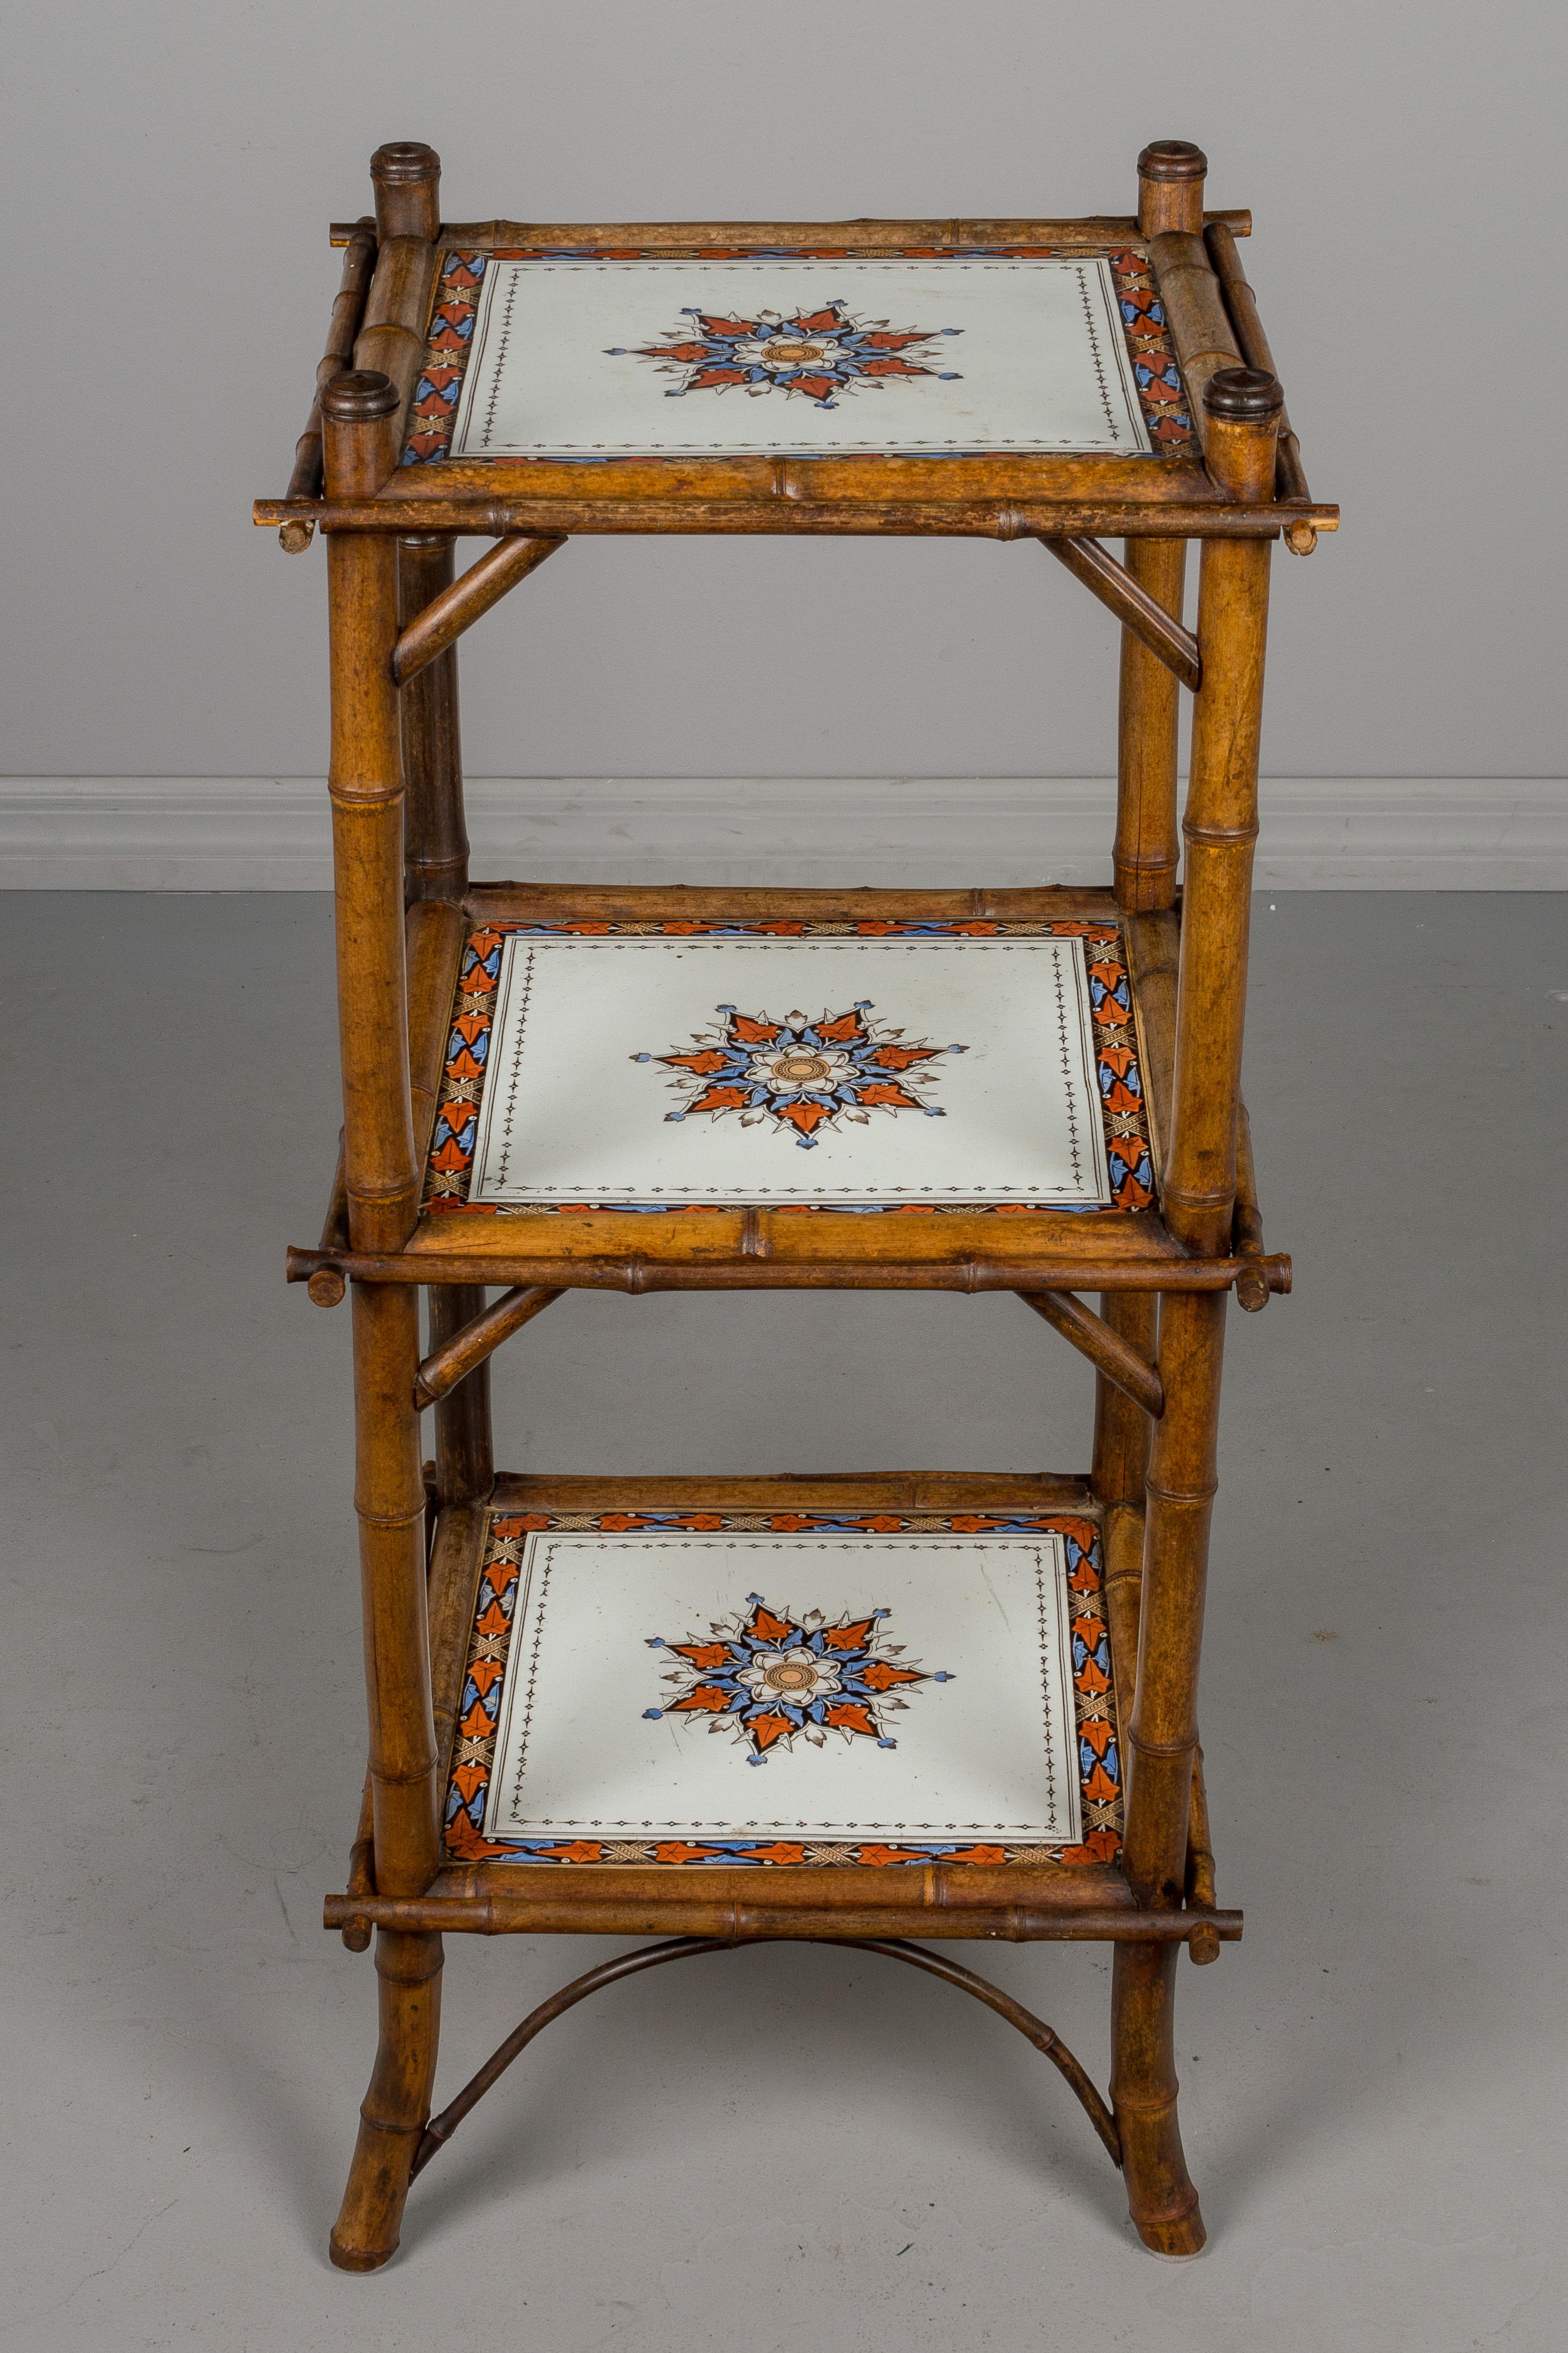 Hand-Crafted 19th Century French Bamboo and Ceramic Tile Stand